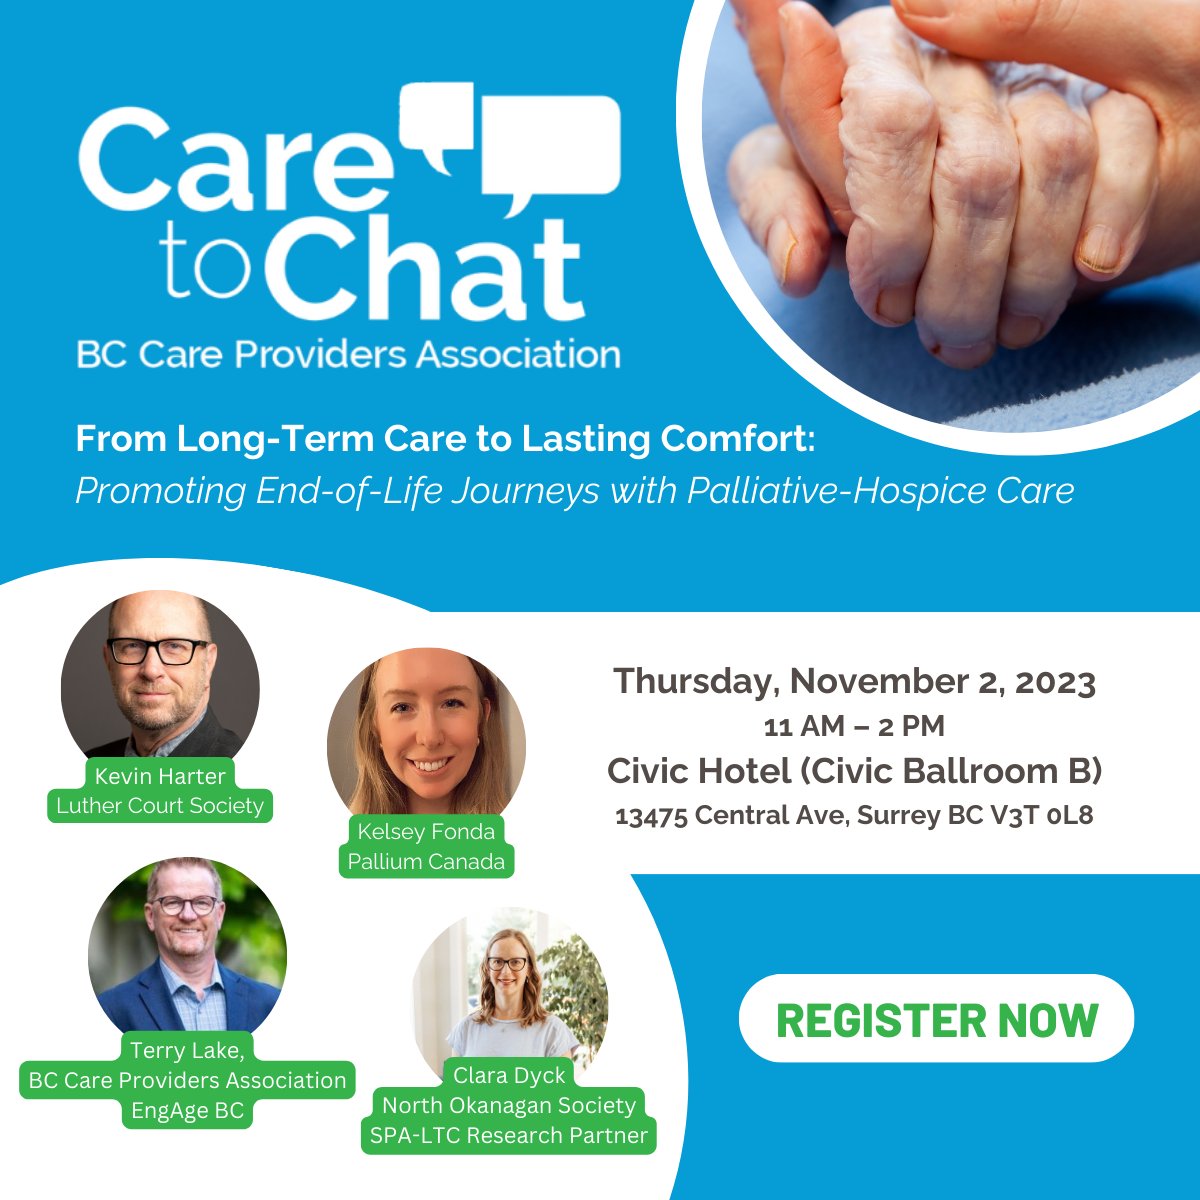 Interested in enhancing the quality of palliative care in long-term care? Join @bccareproviders as they kick off the 11thseason of #CaretoChat on November 2nd at Surrey’s Civic Hotel. Don’t delay – Purchase your ticket now! bccare.member365.com/public/event/d…